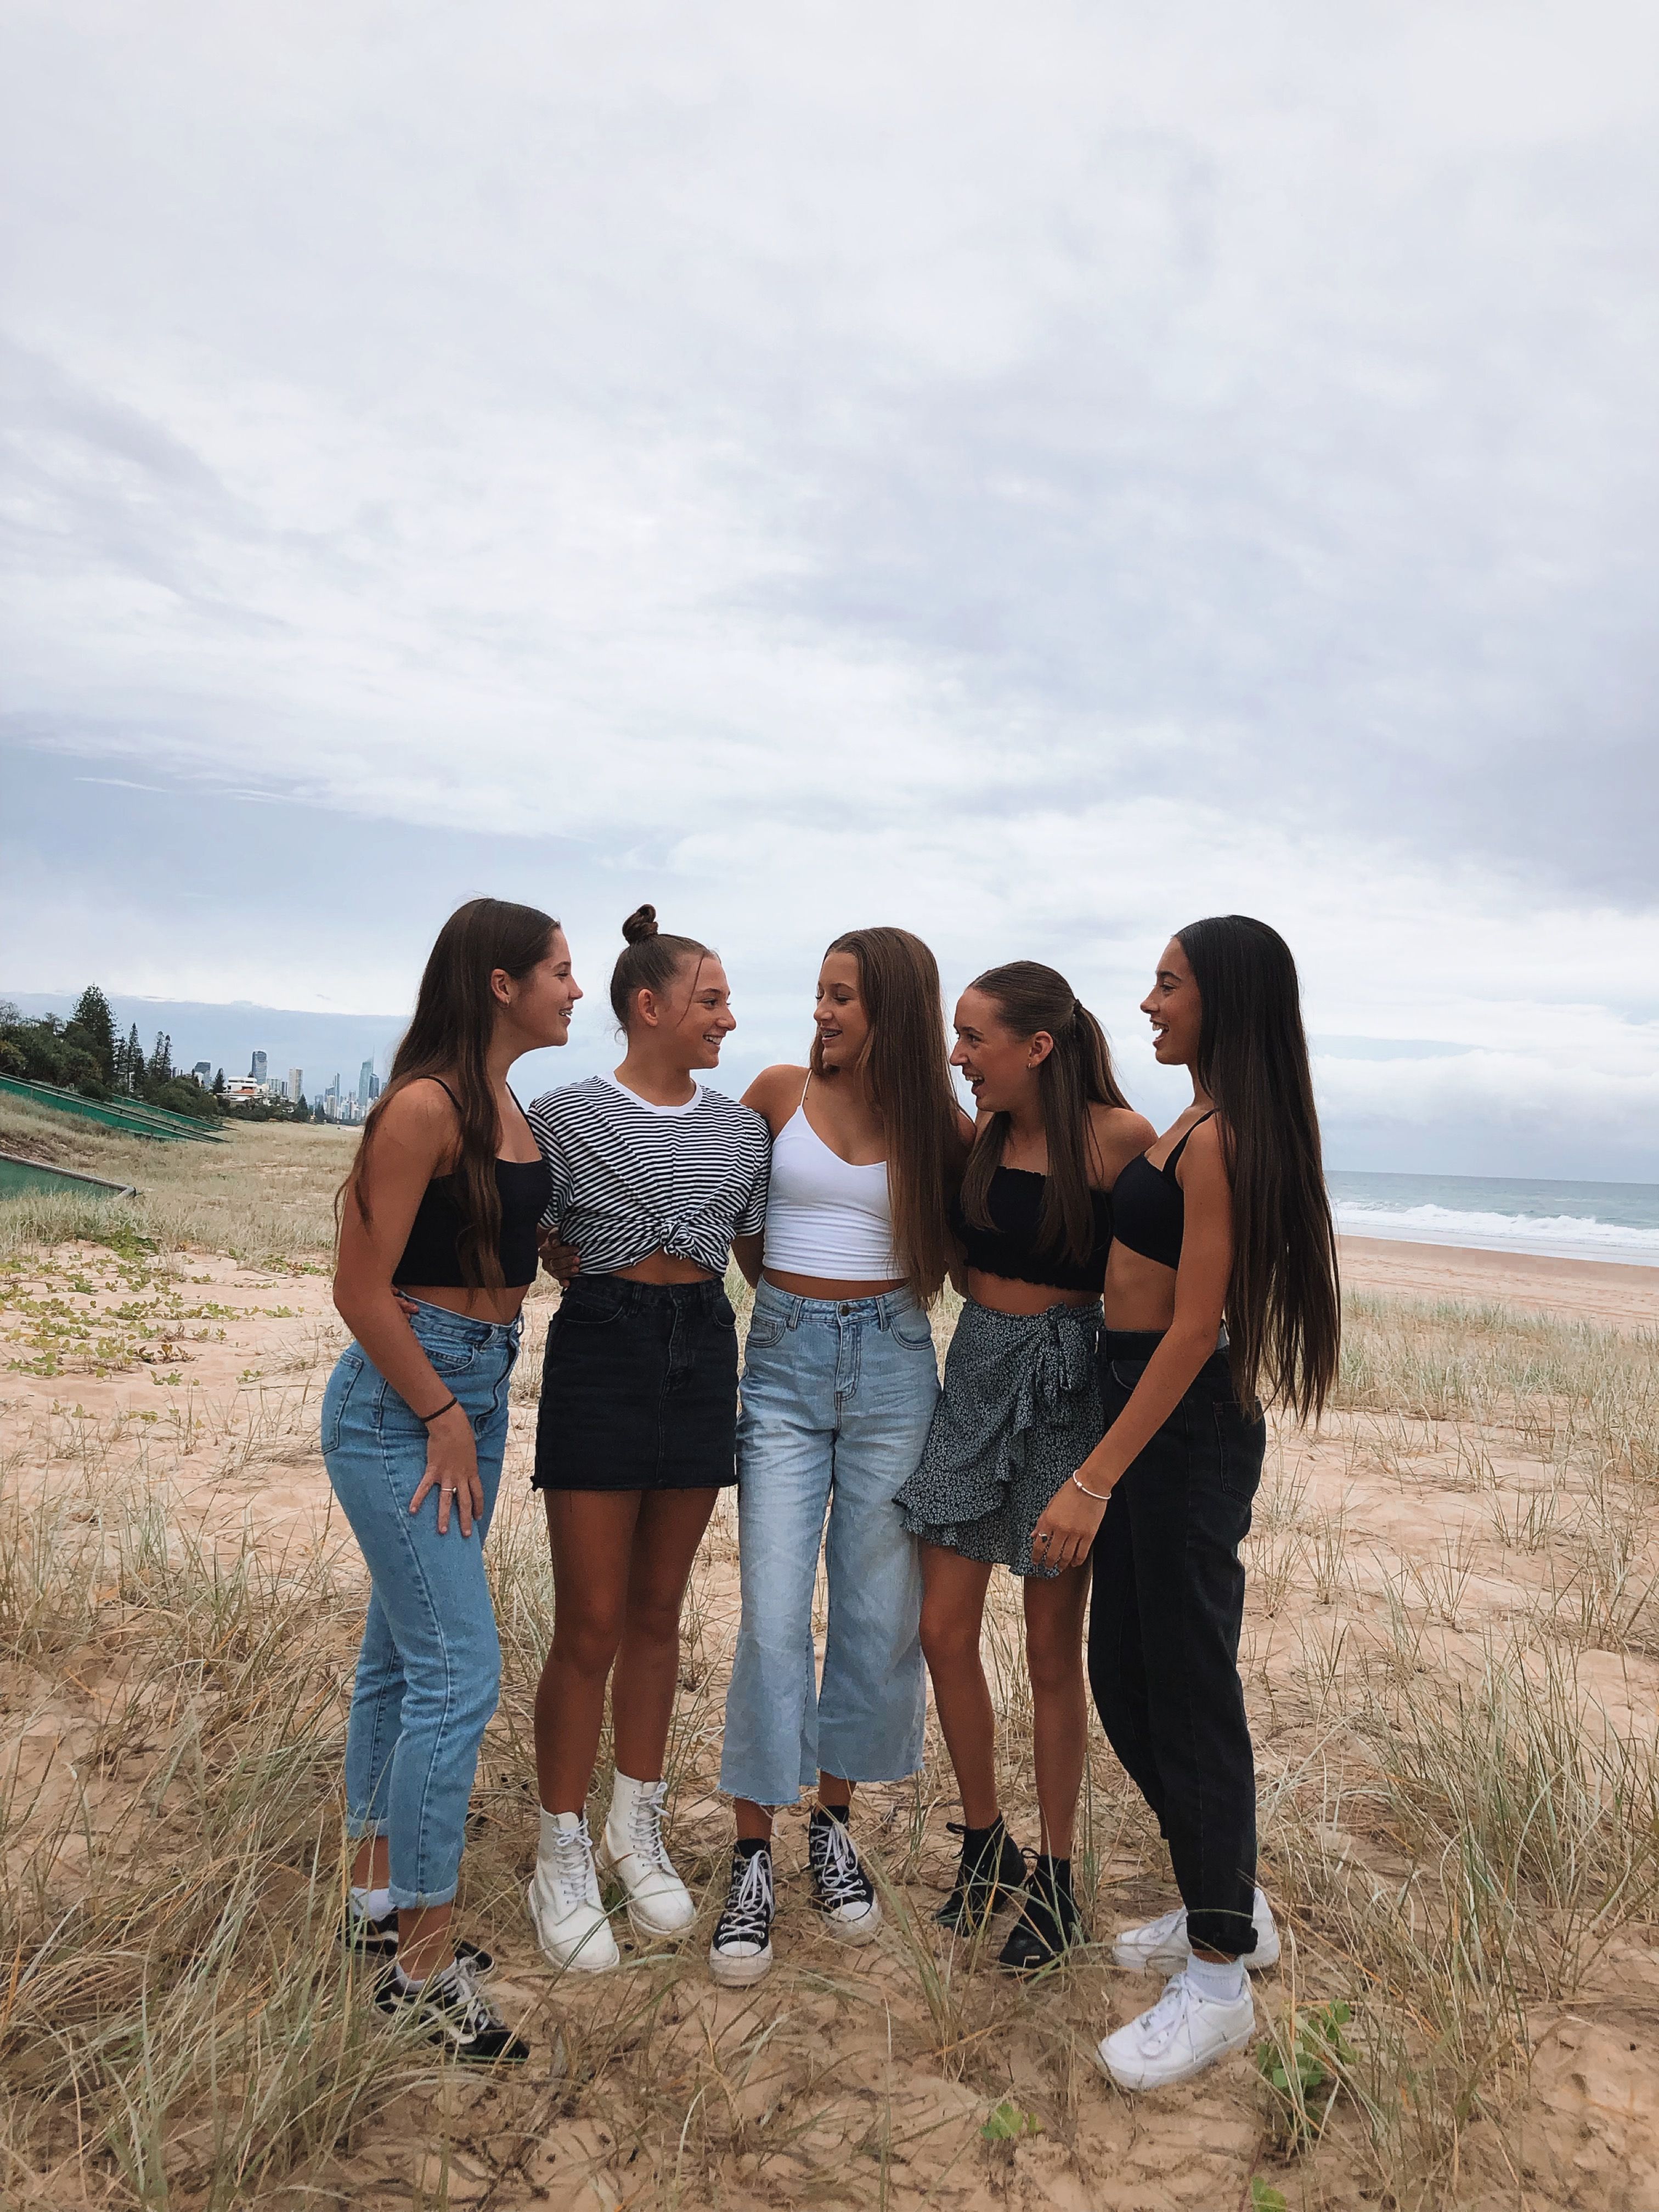 Hannah Meloche on Instagram: “blessed” | Group picture poses, Friendship  photoshoot, Friend photoshoot